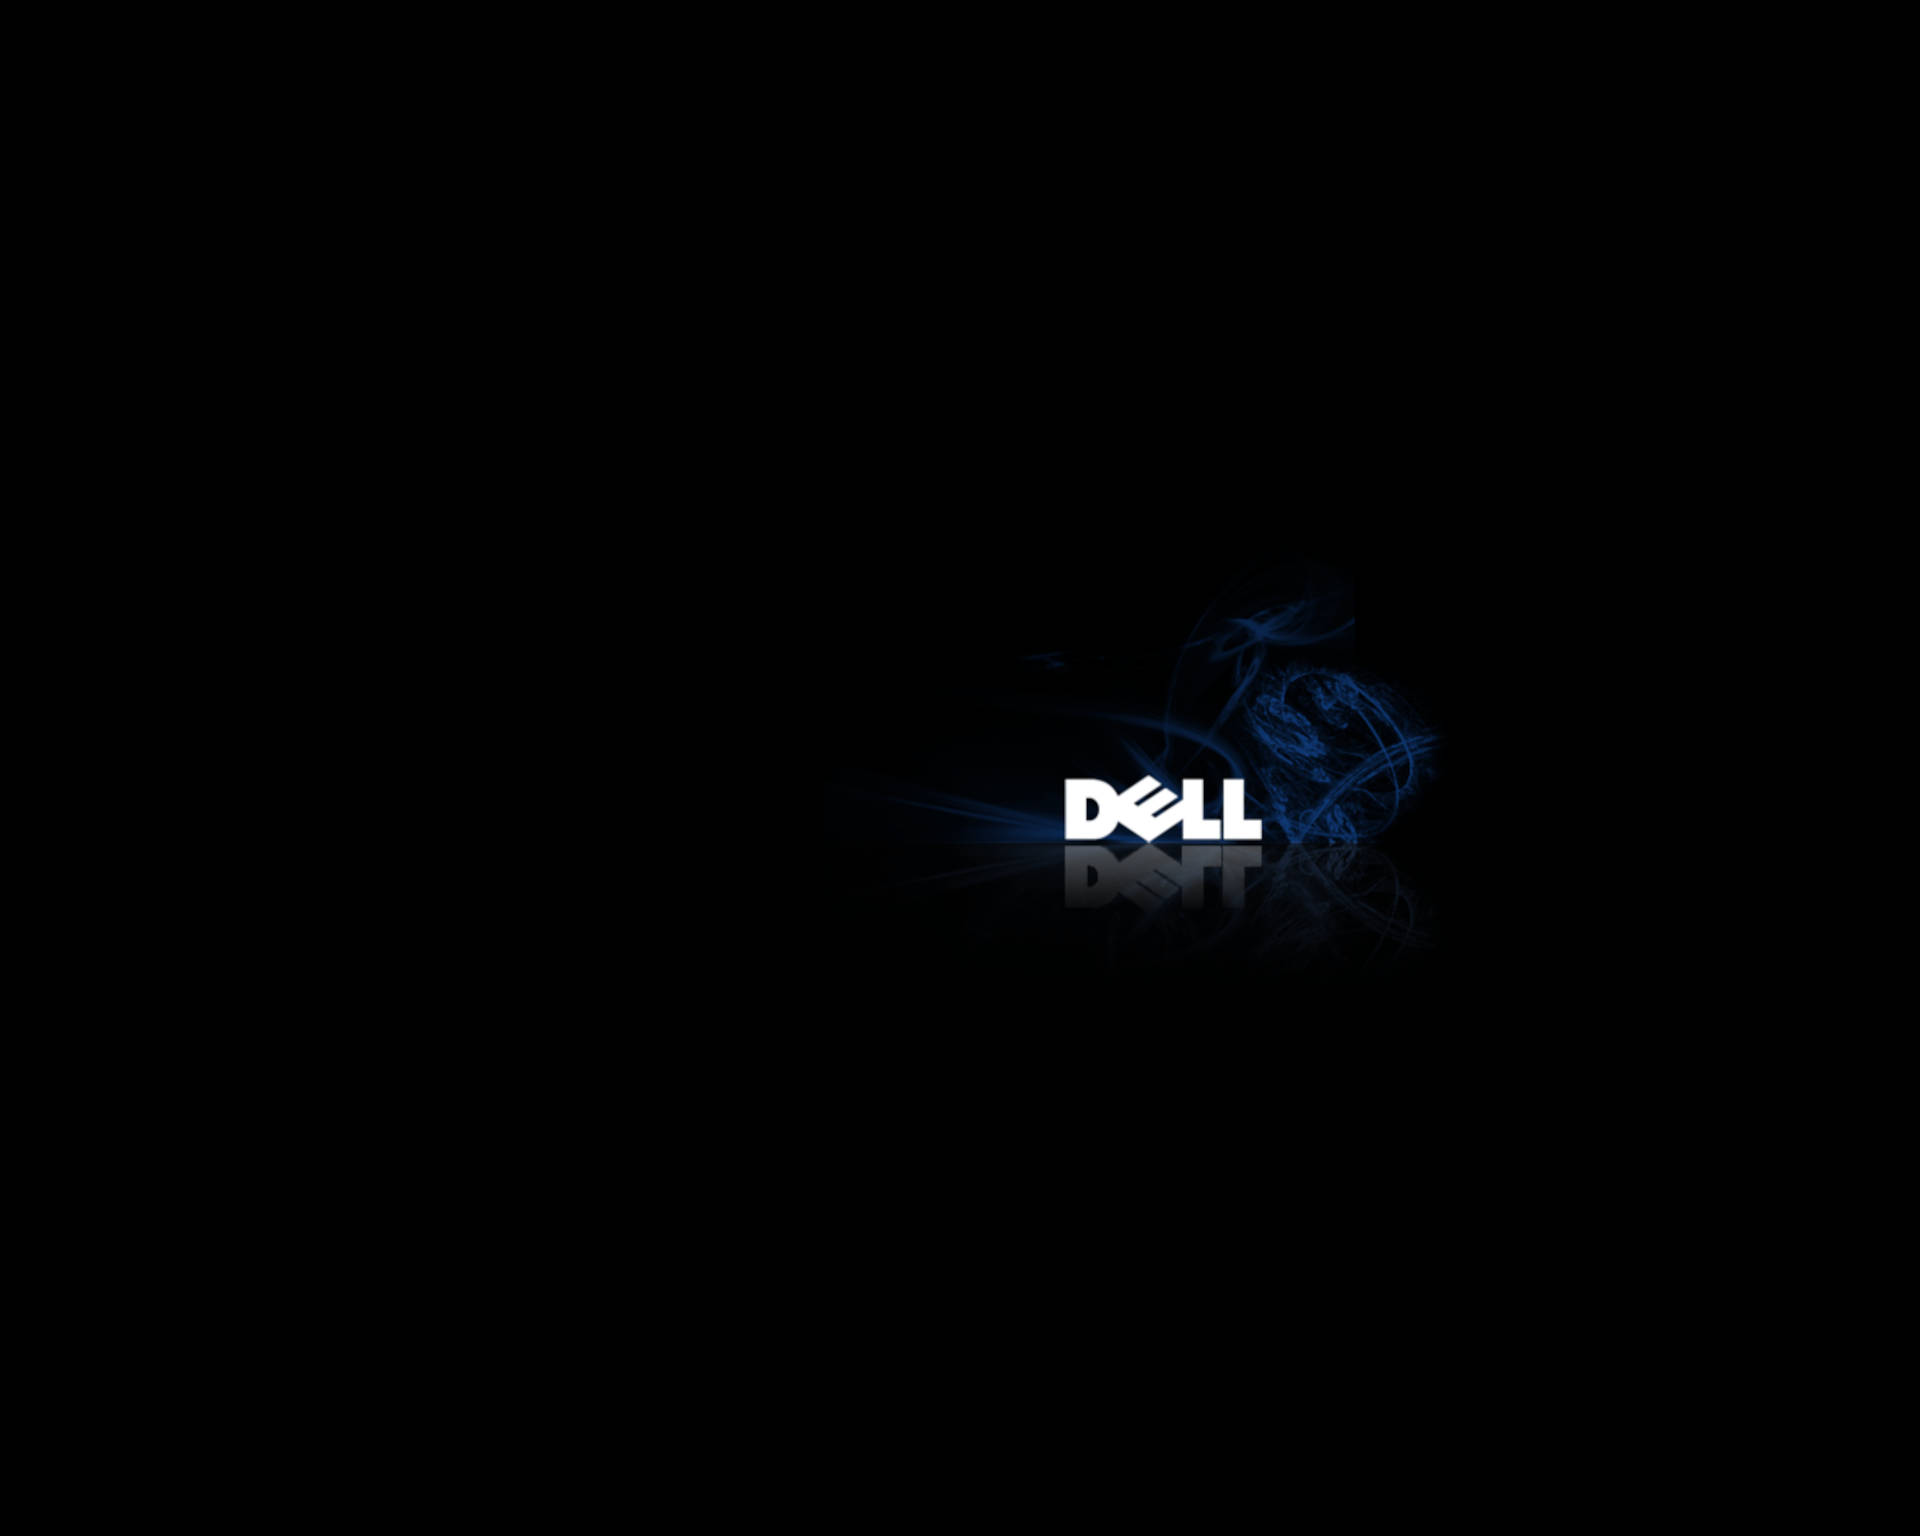 HD wallpaper: Dell by Aj, Dell logo, Computers, Others, blue, windows, xps  | Wallpaper Flare